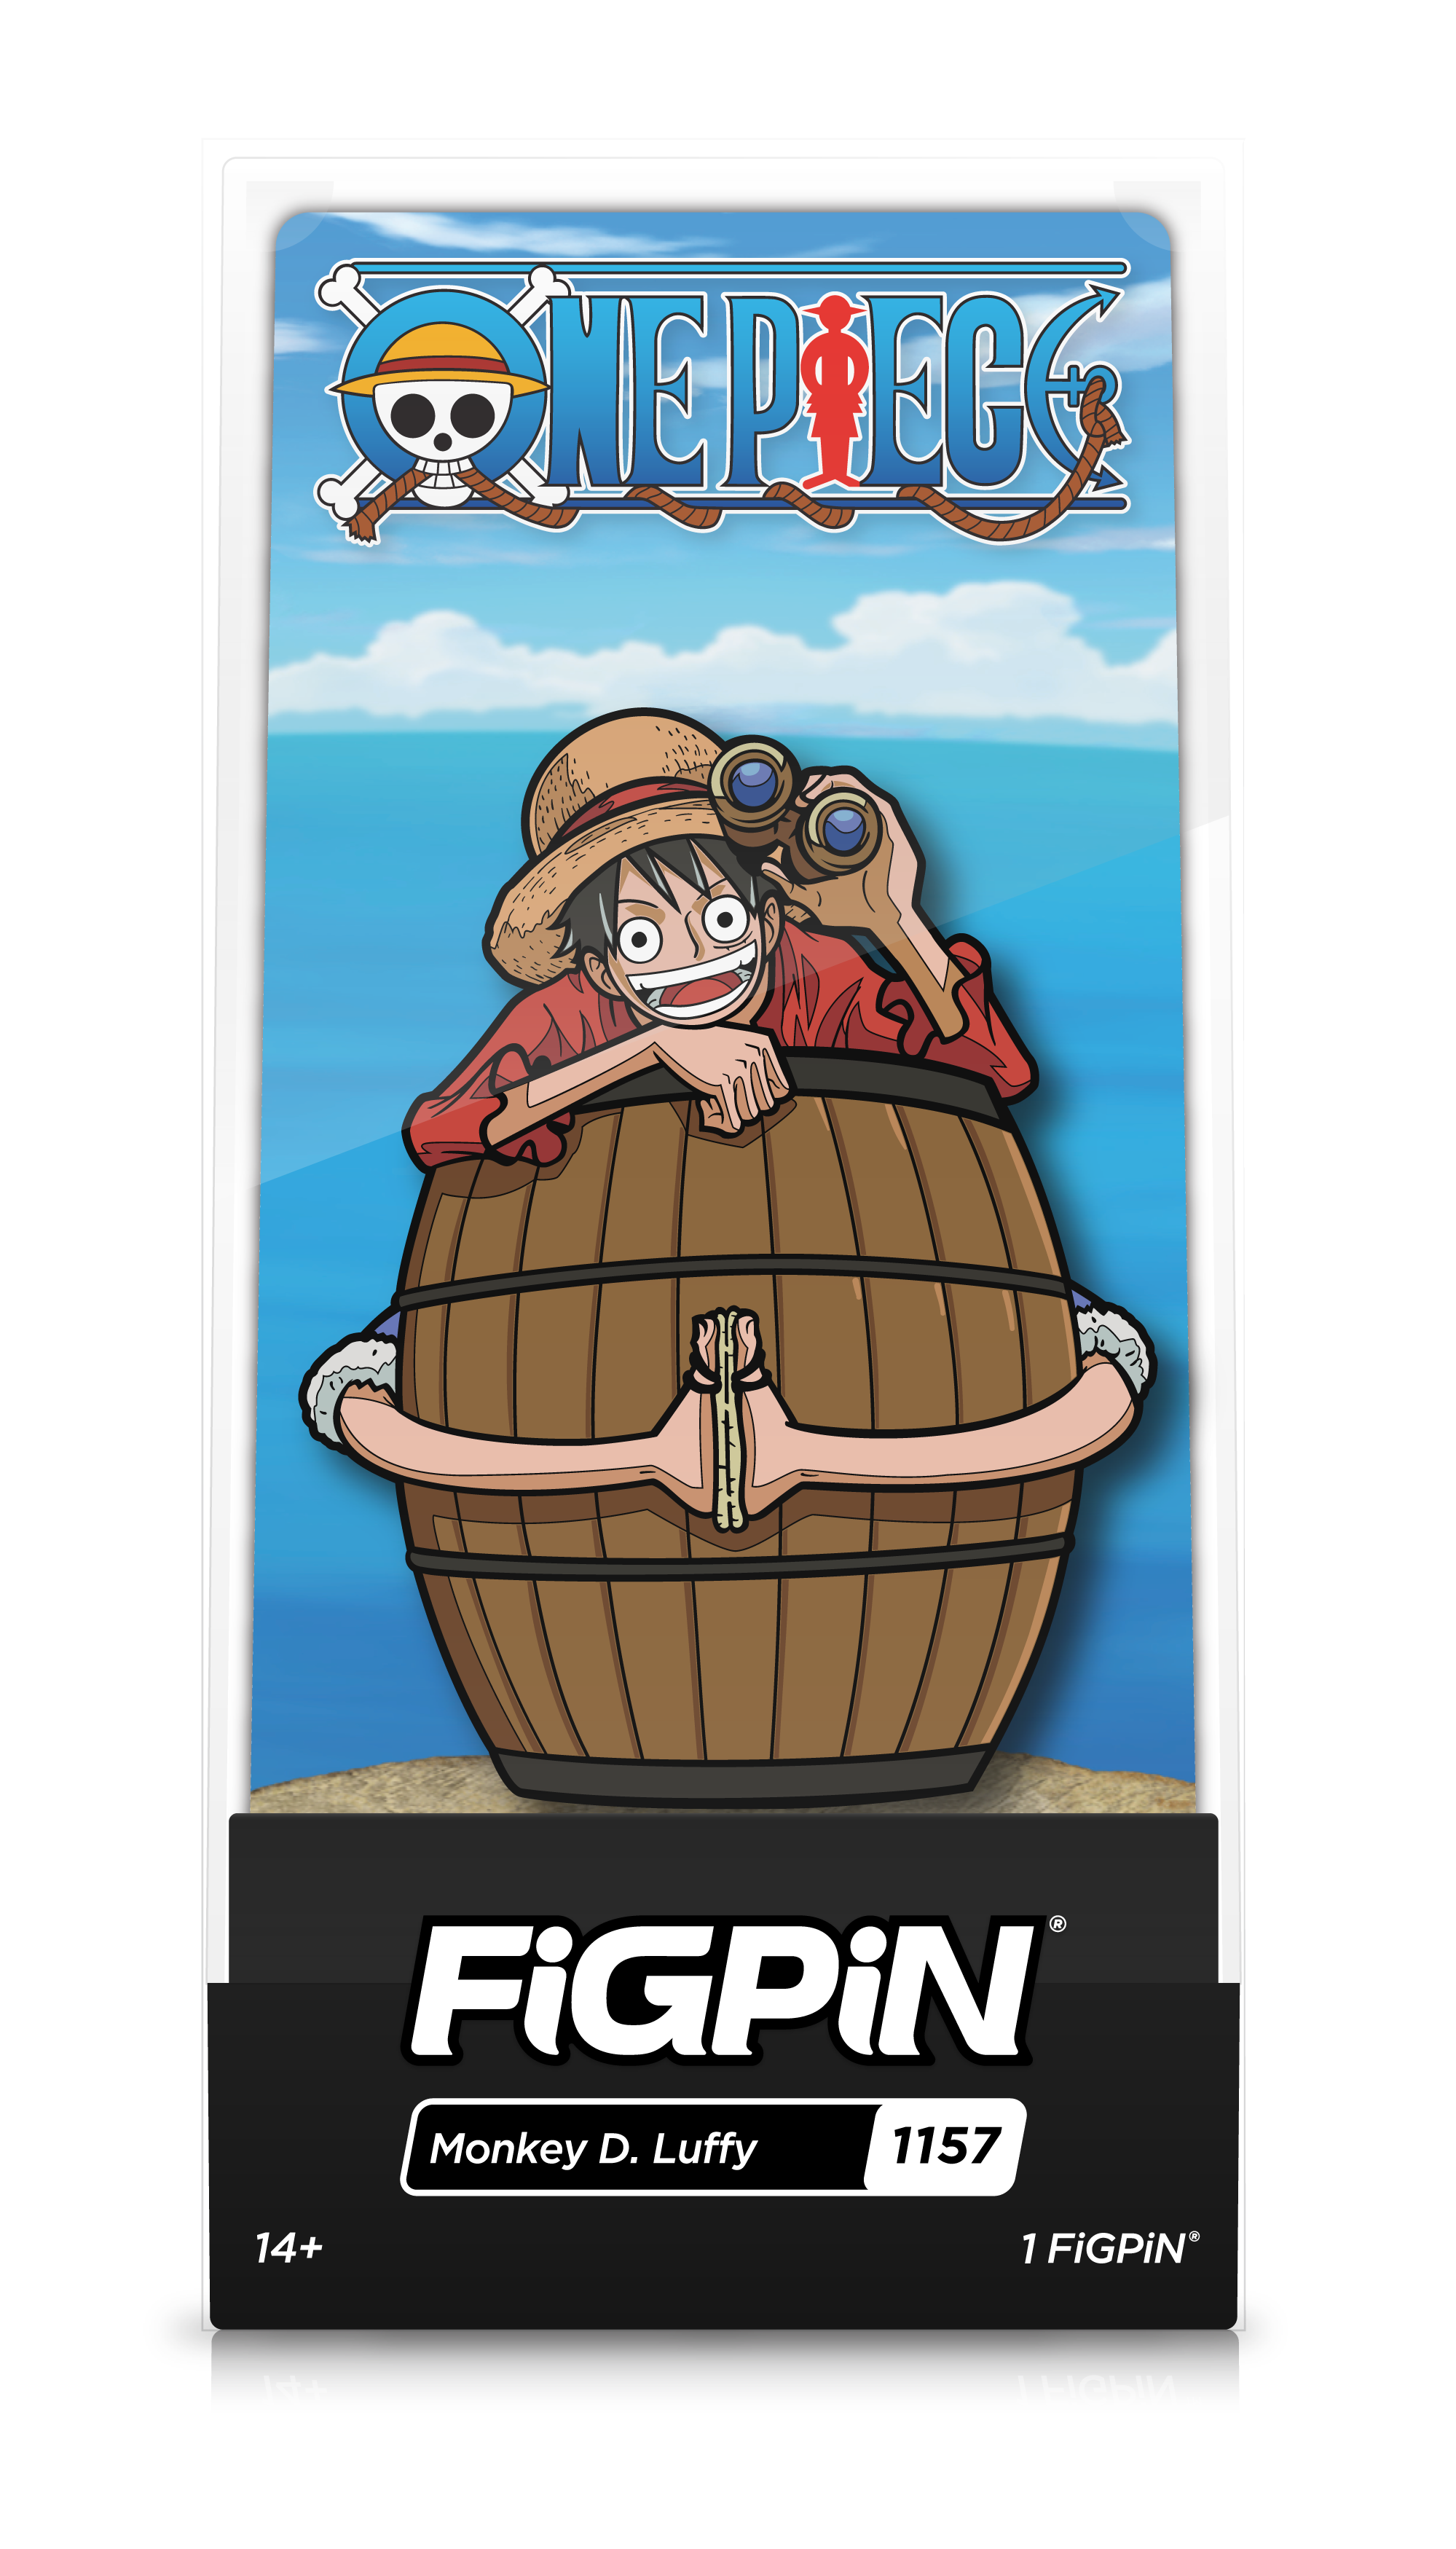 One Piece - Monkey D. Luffy (#1157) FiGPiN image count 1